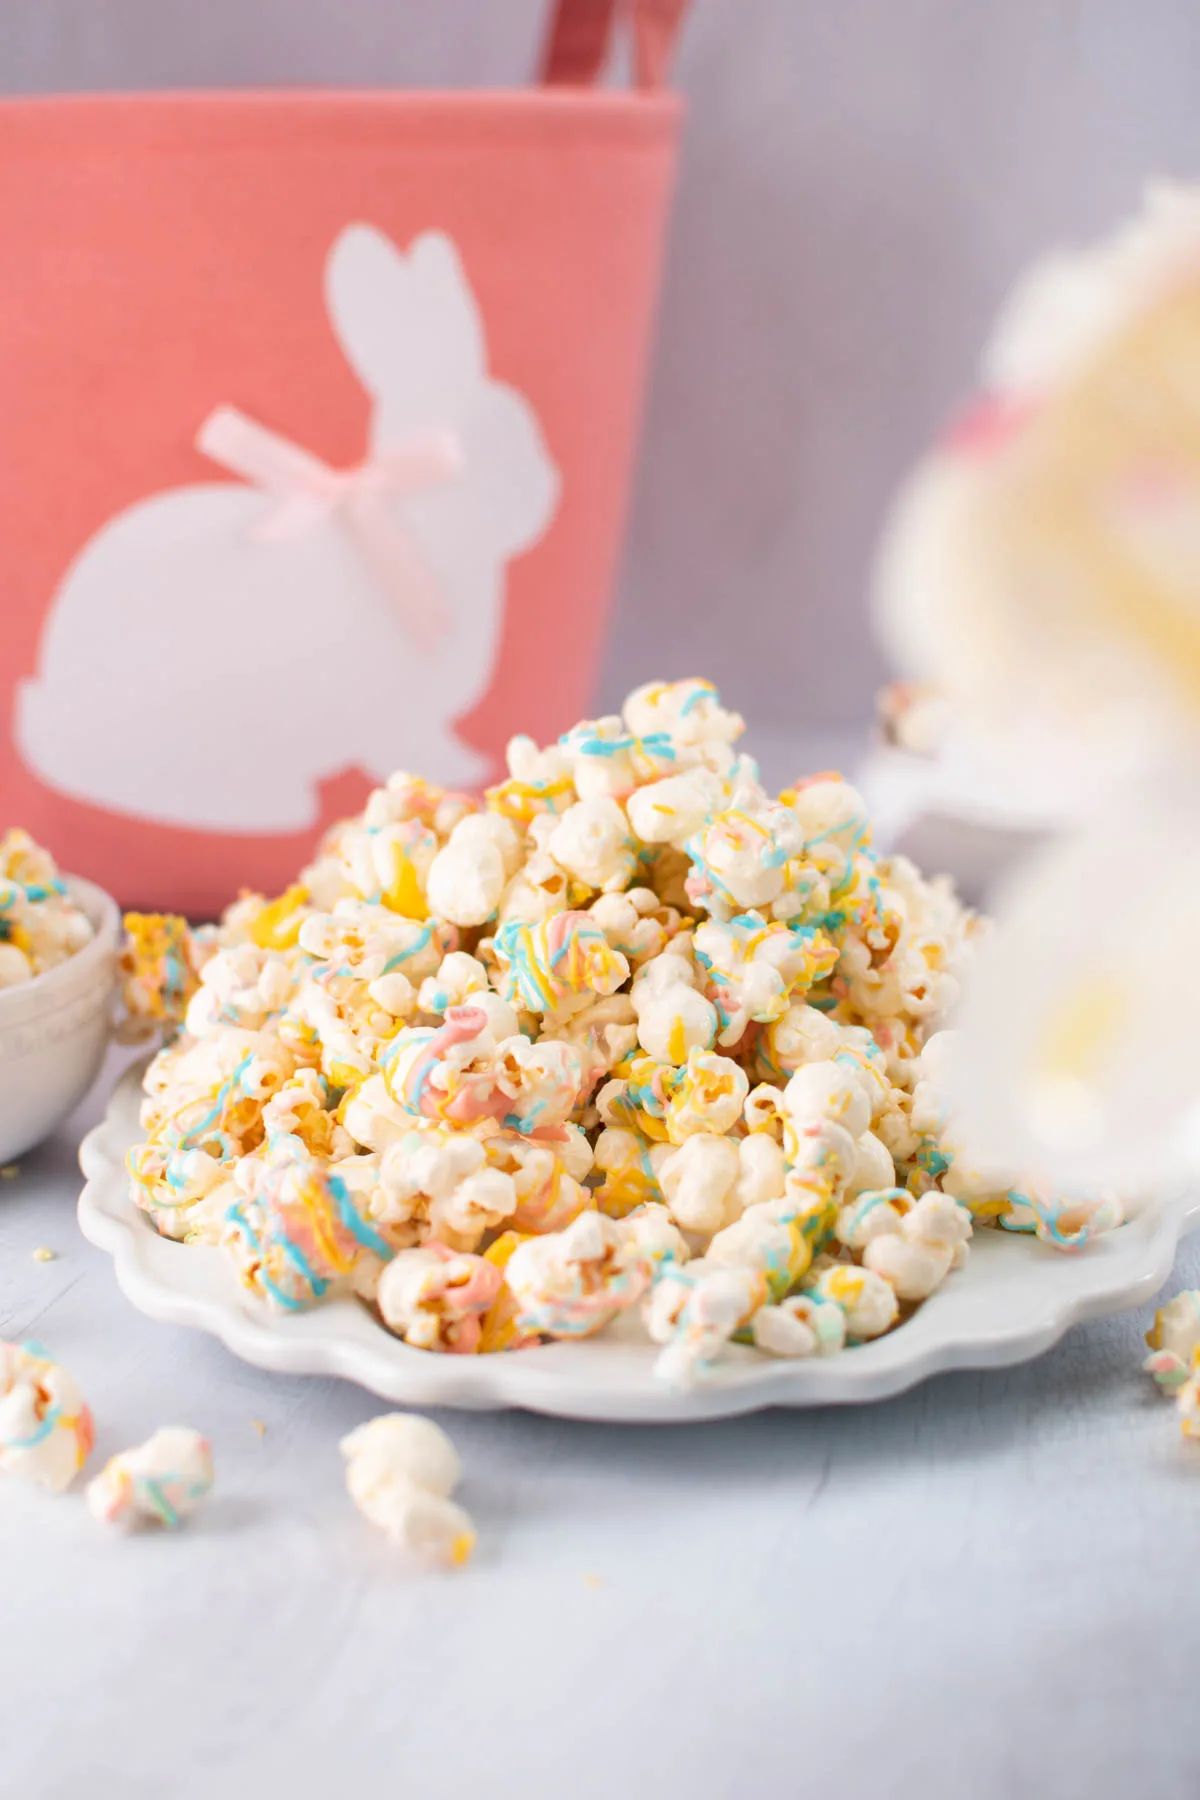 Large pile of easter popcorn on white plate, with pink bunny Easter basket in background.